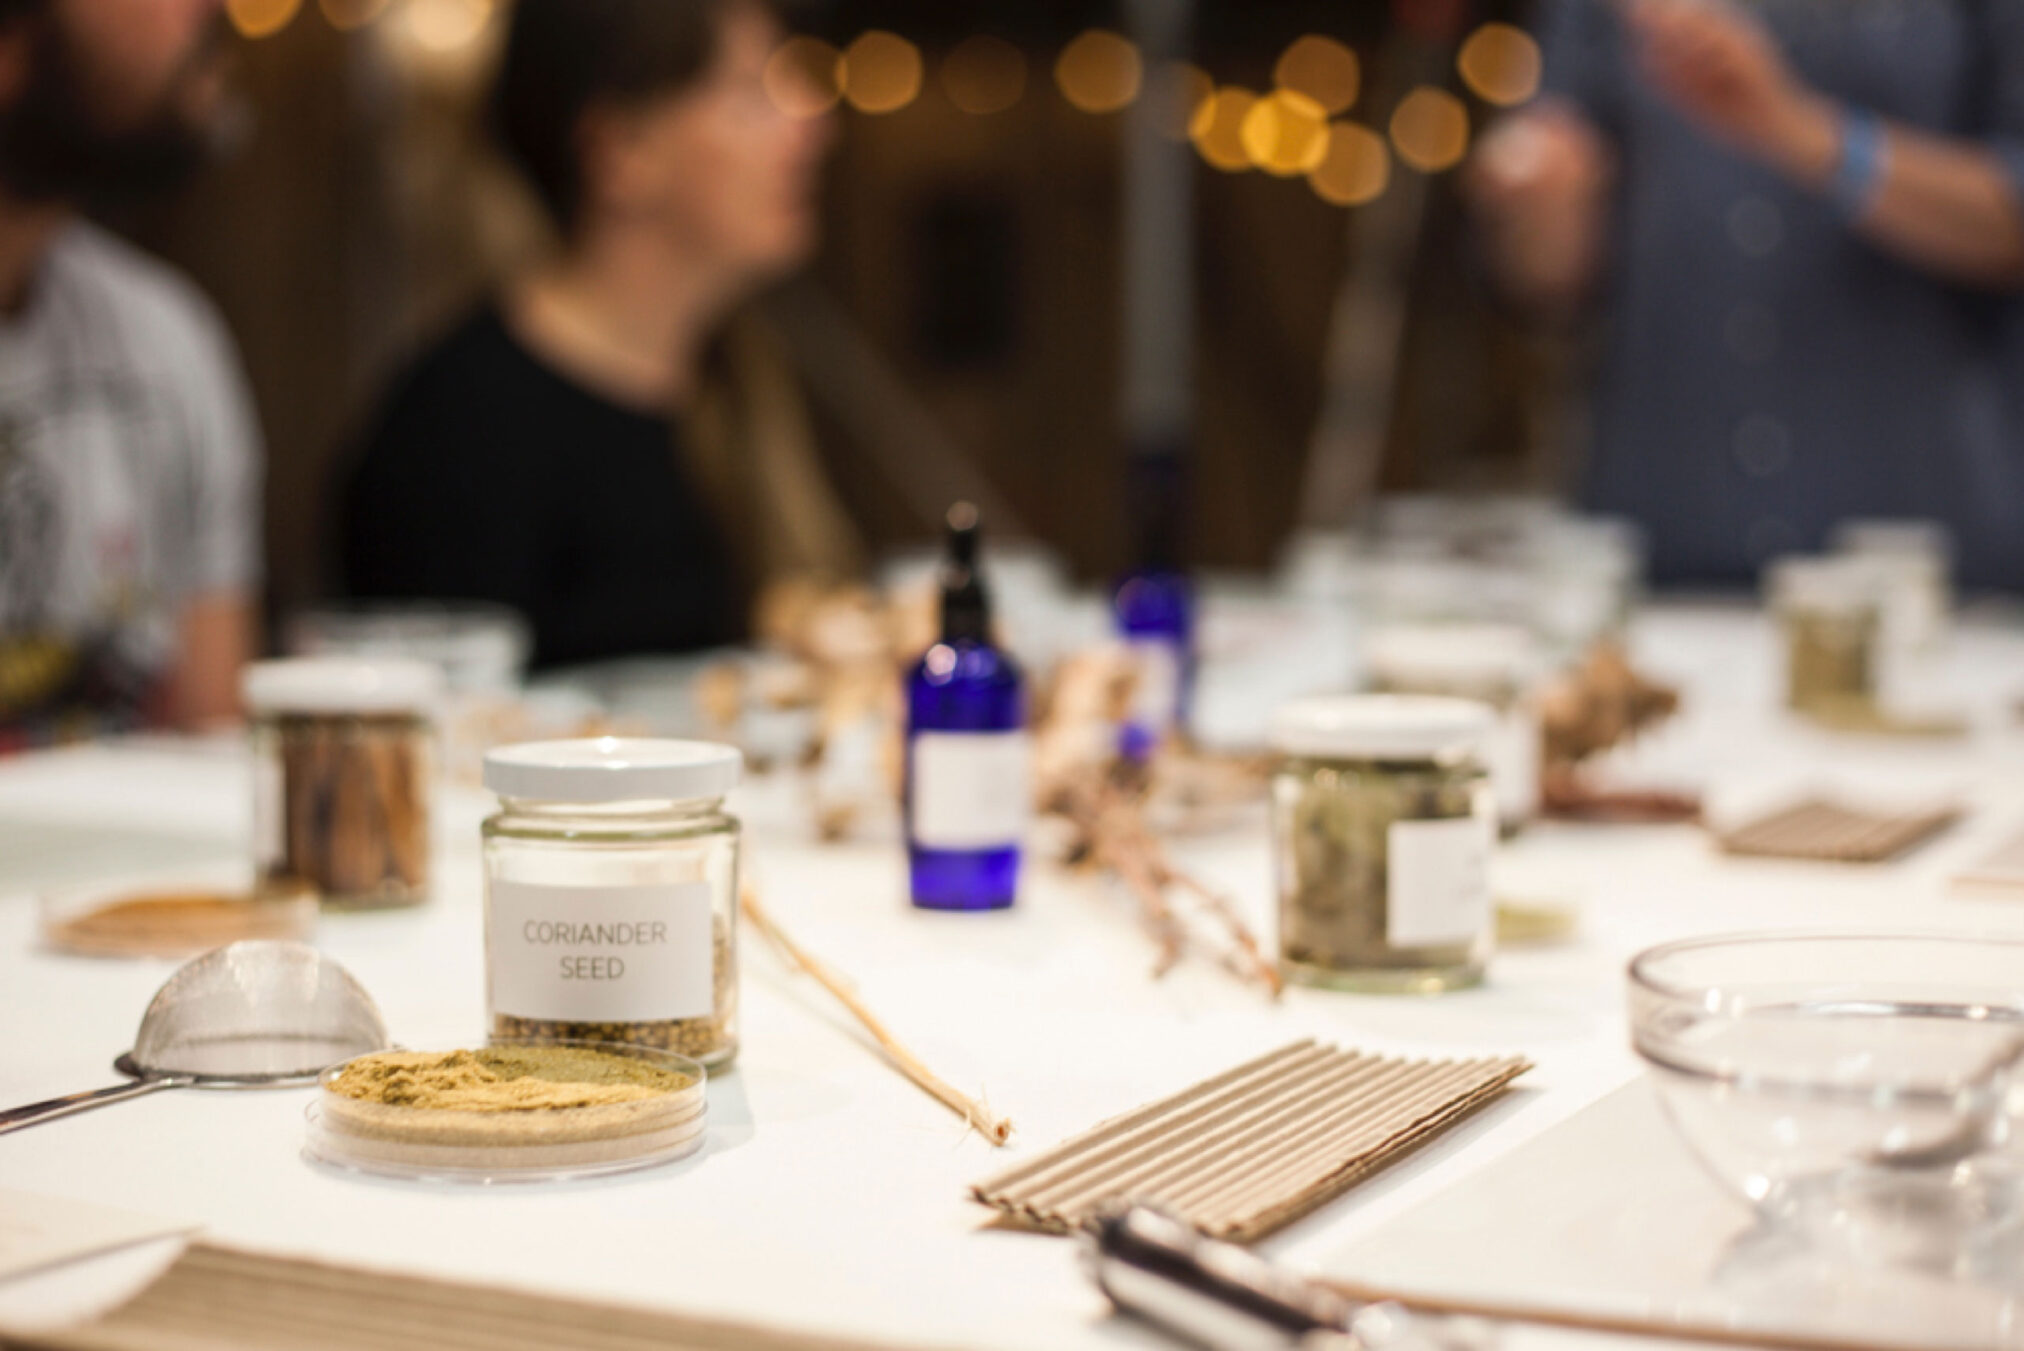 Grains for Thoughts - sensory workshop by Heka London